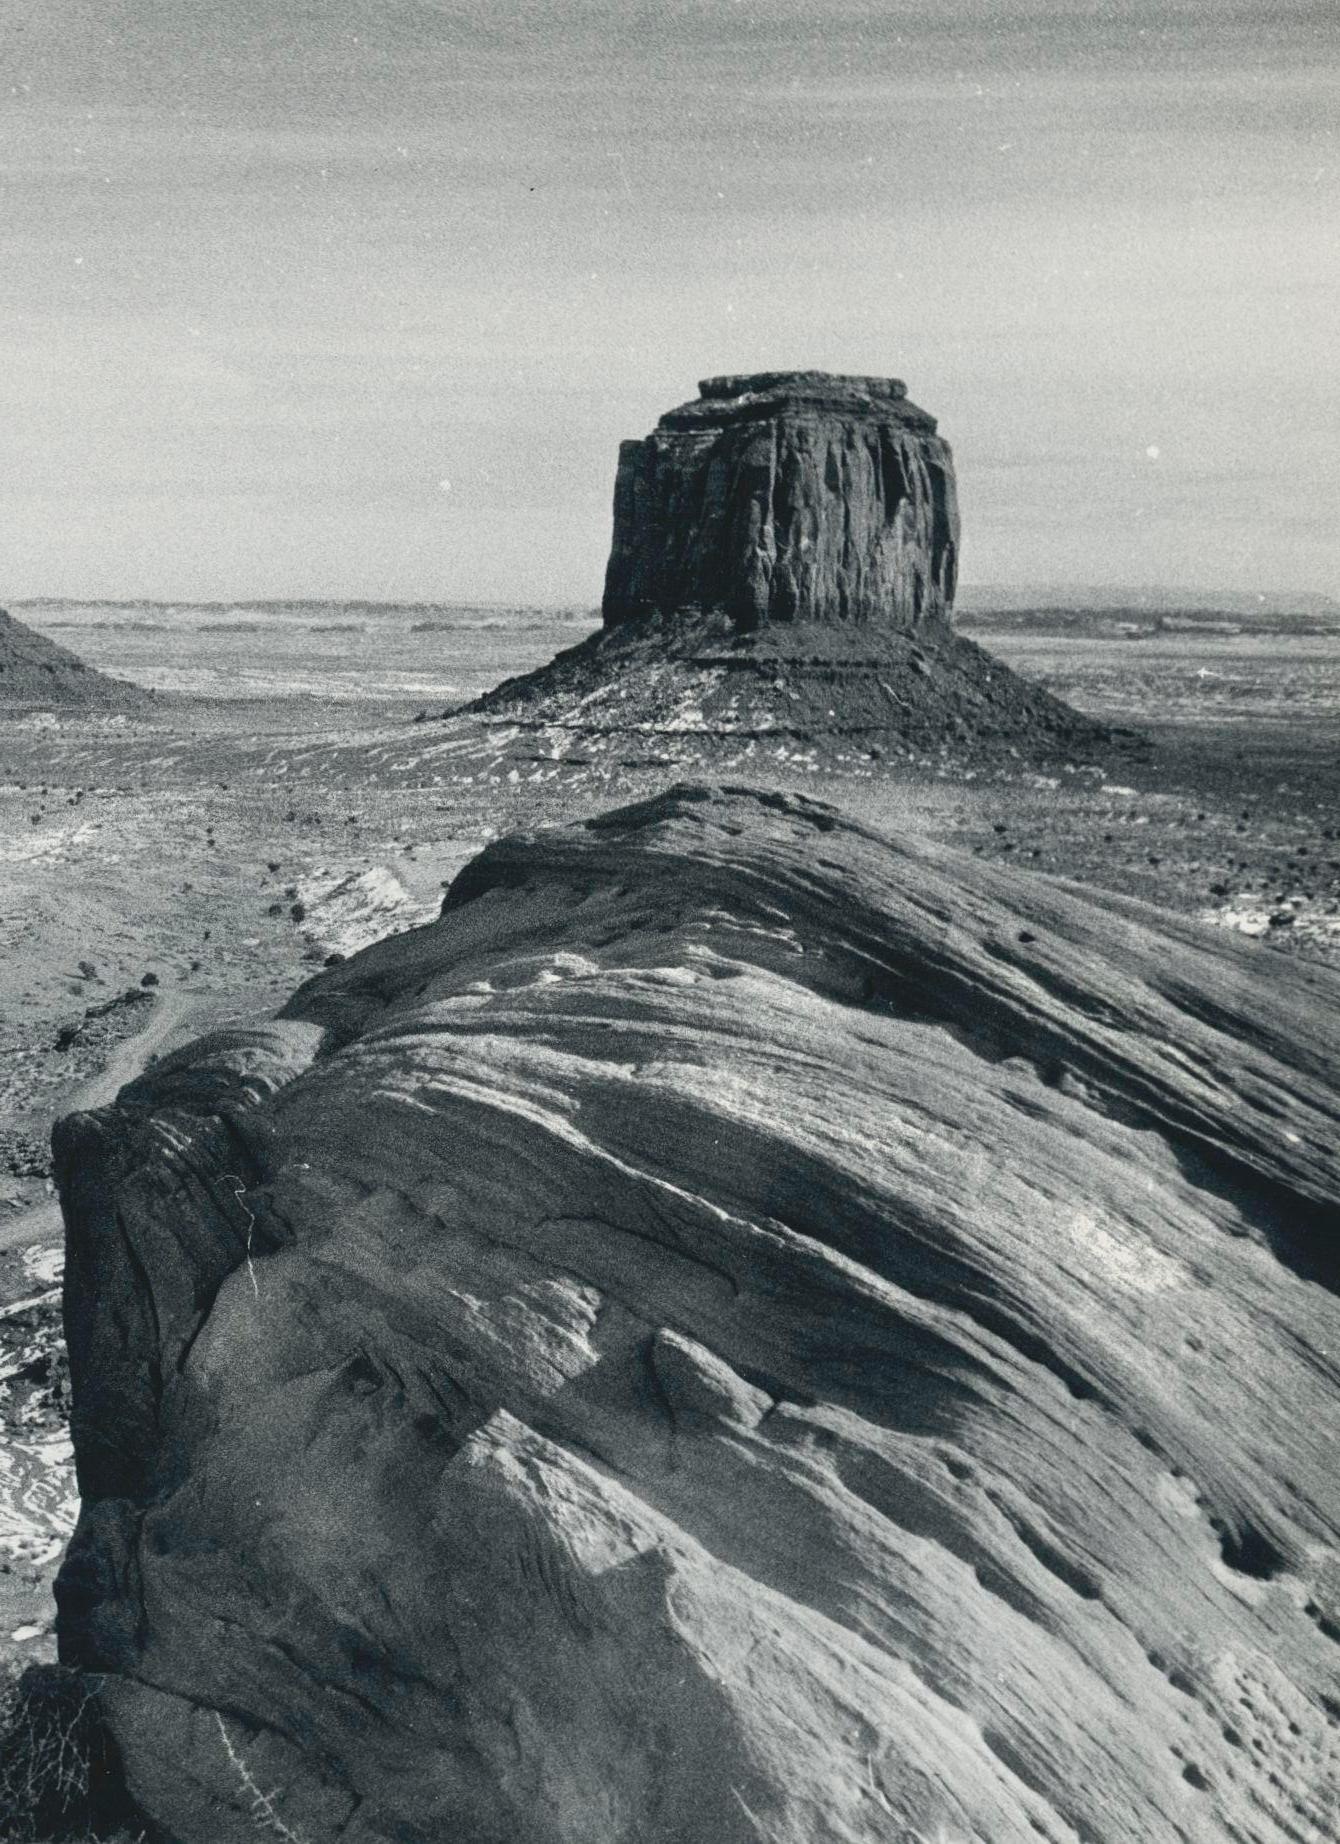 Monument Valley, Utah/Arizona, Black and White, USA 1960s, 23 x 16, 8 cm - Photograph by Erich Andres